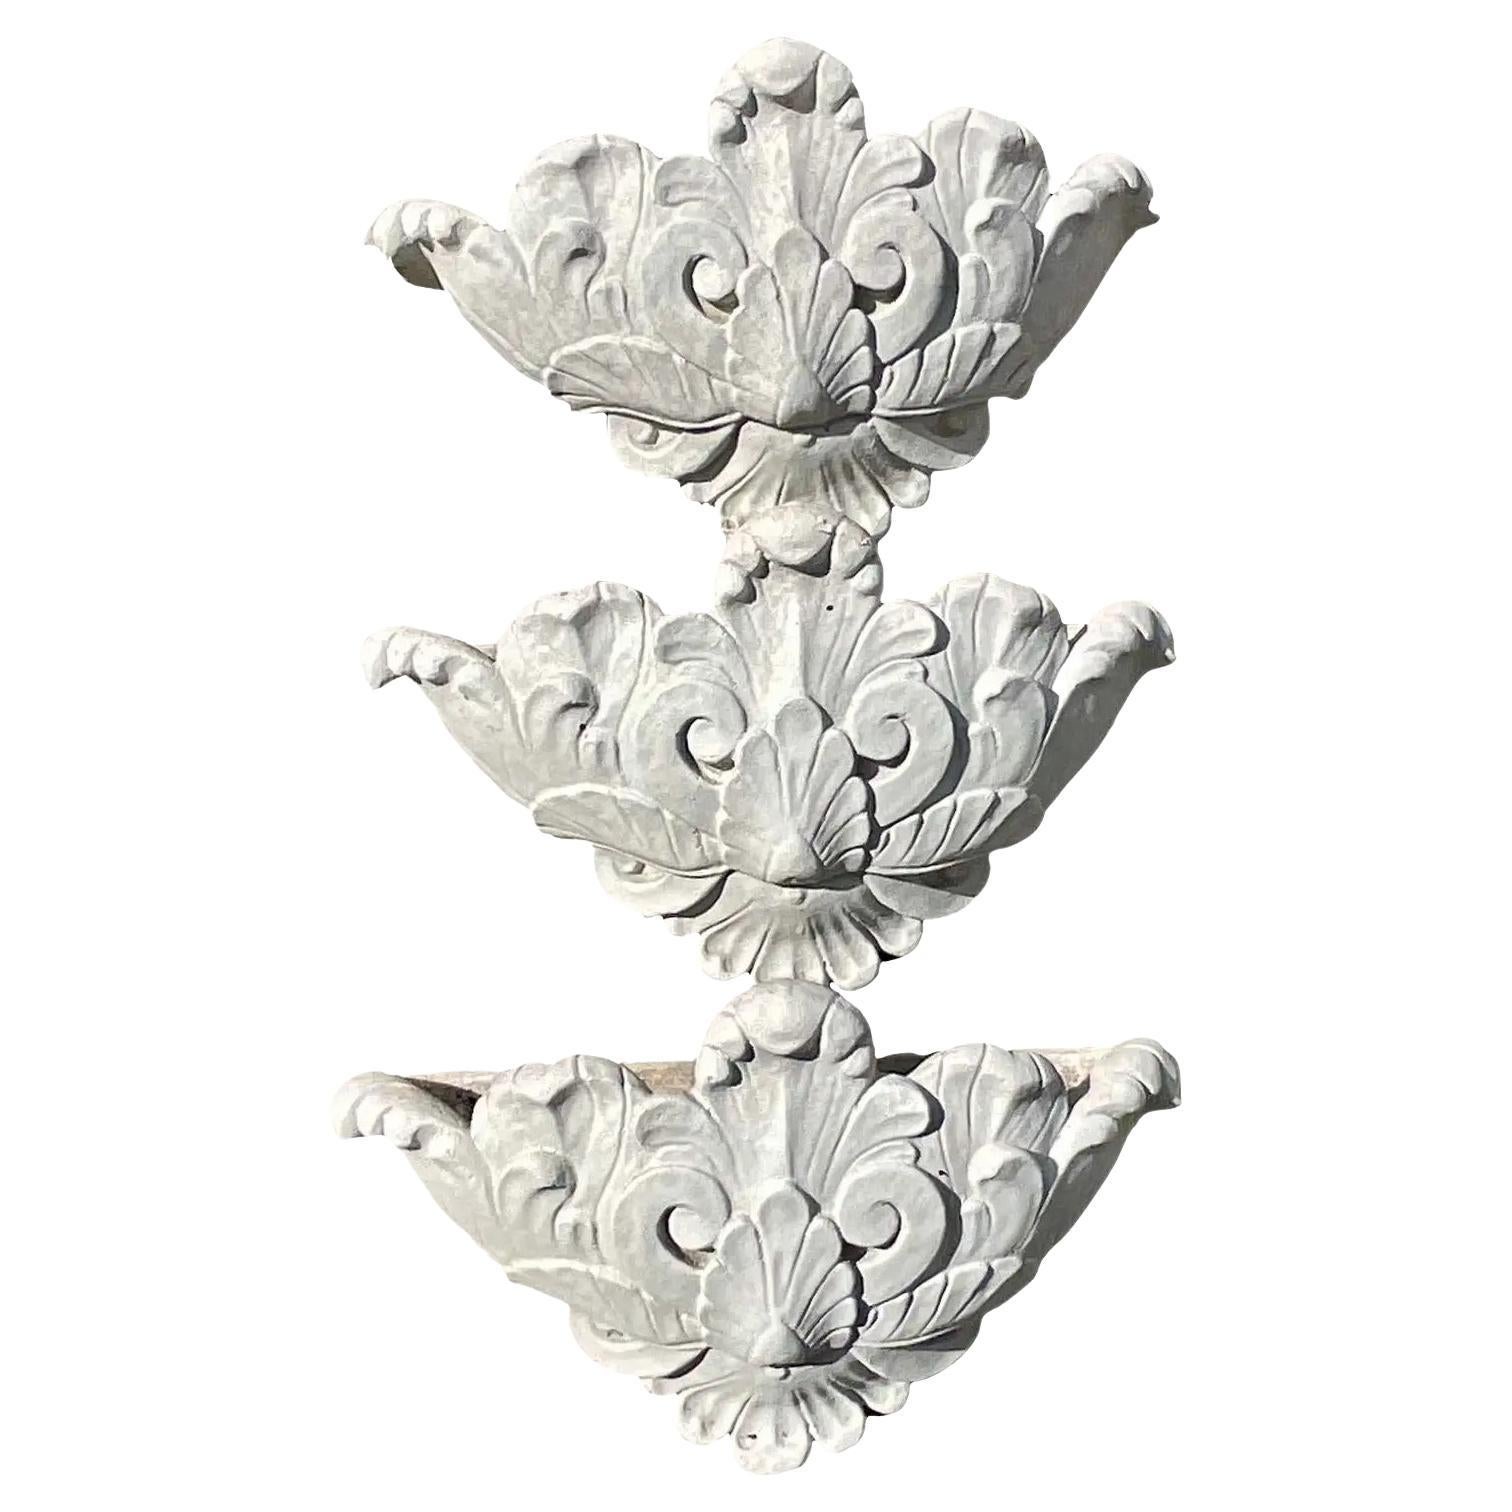 Vintage Garden Stone Wall Planters - Set of 3 For Sale